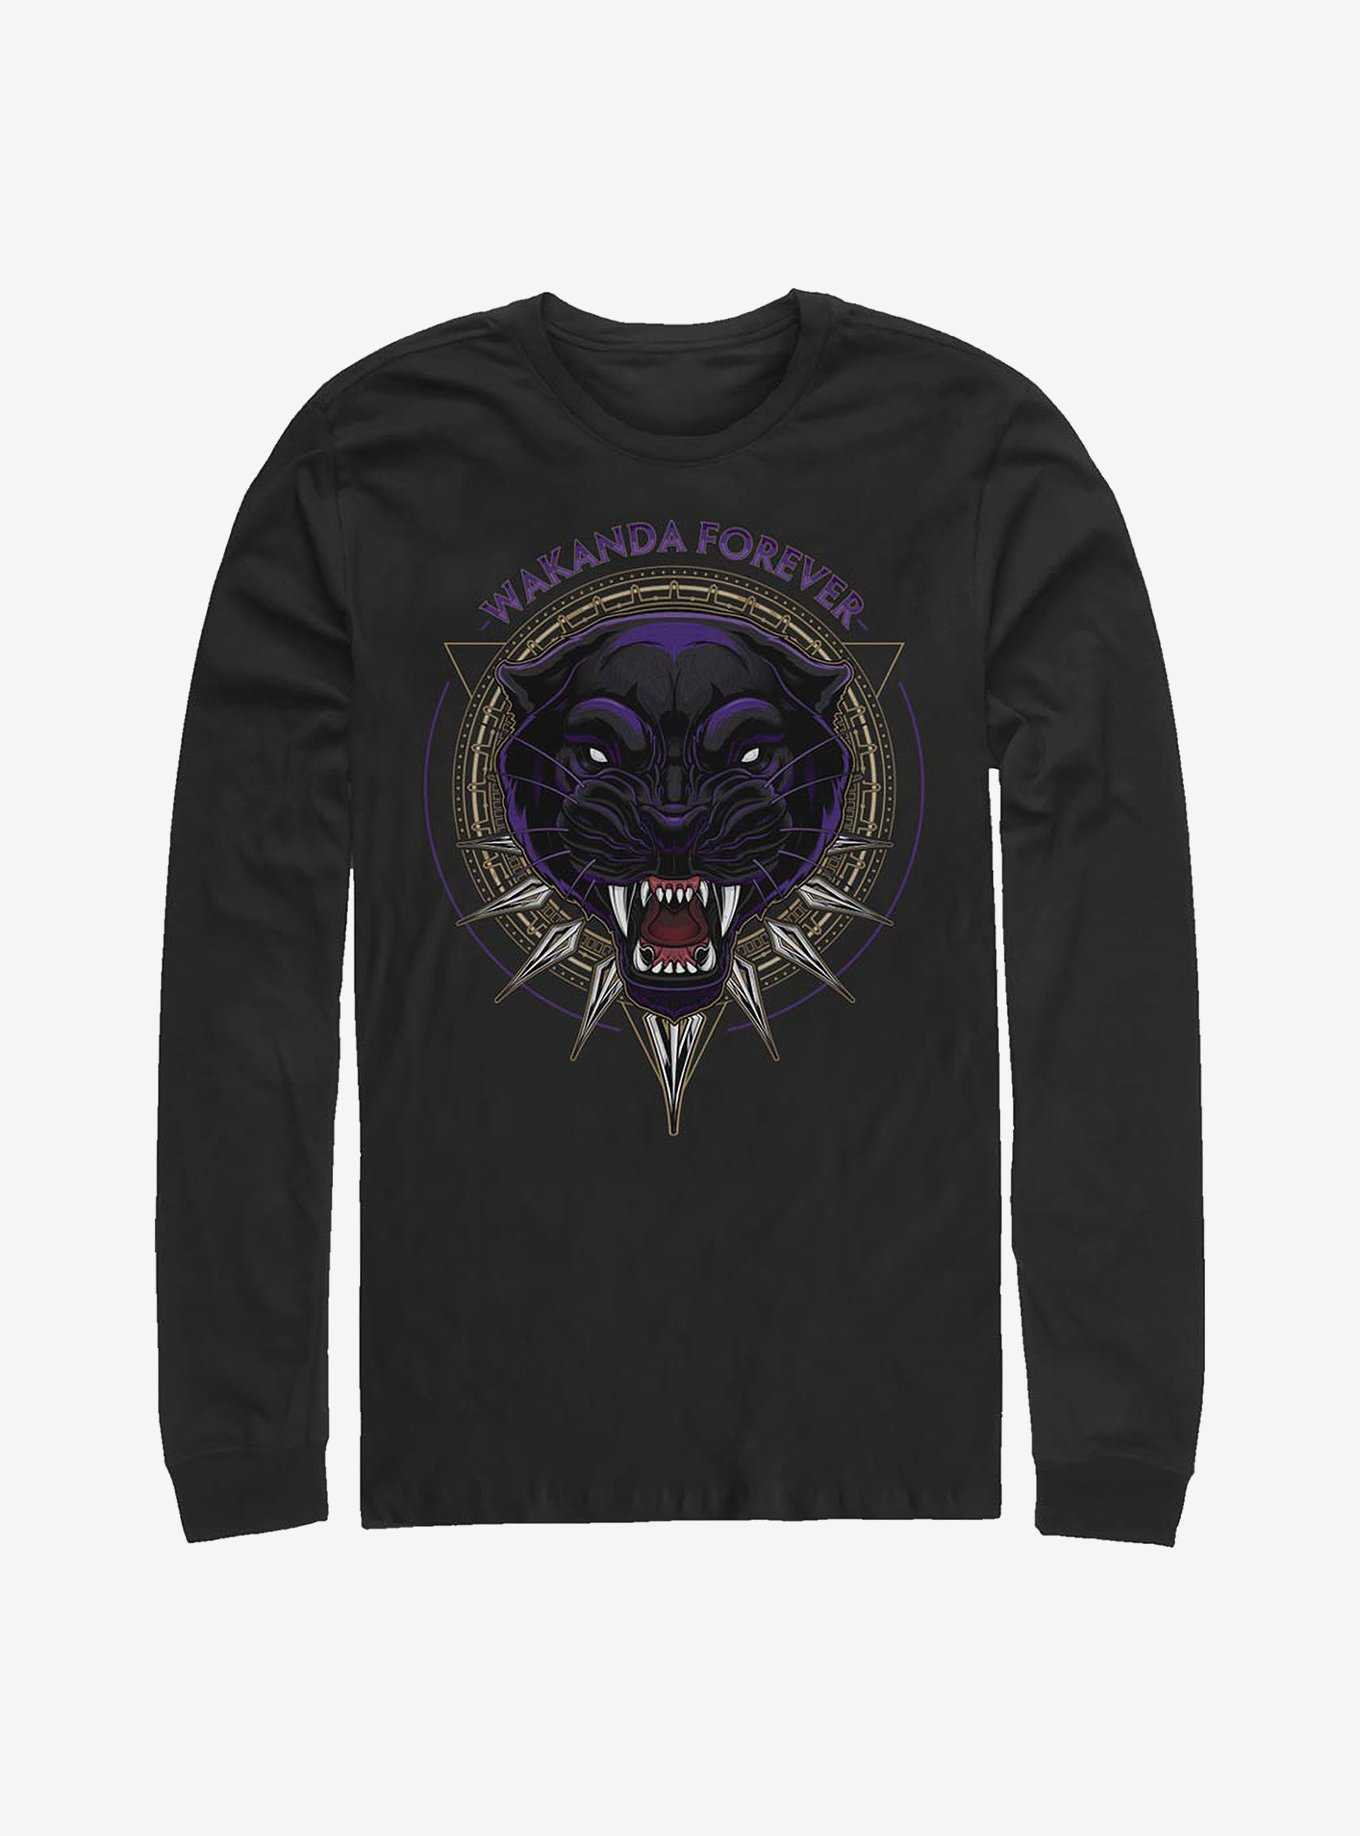 Marvel Black Panther Fearless Long-Sleeve T-Shirt, , hi-res